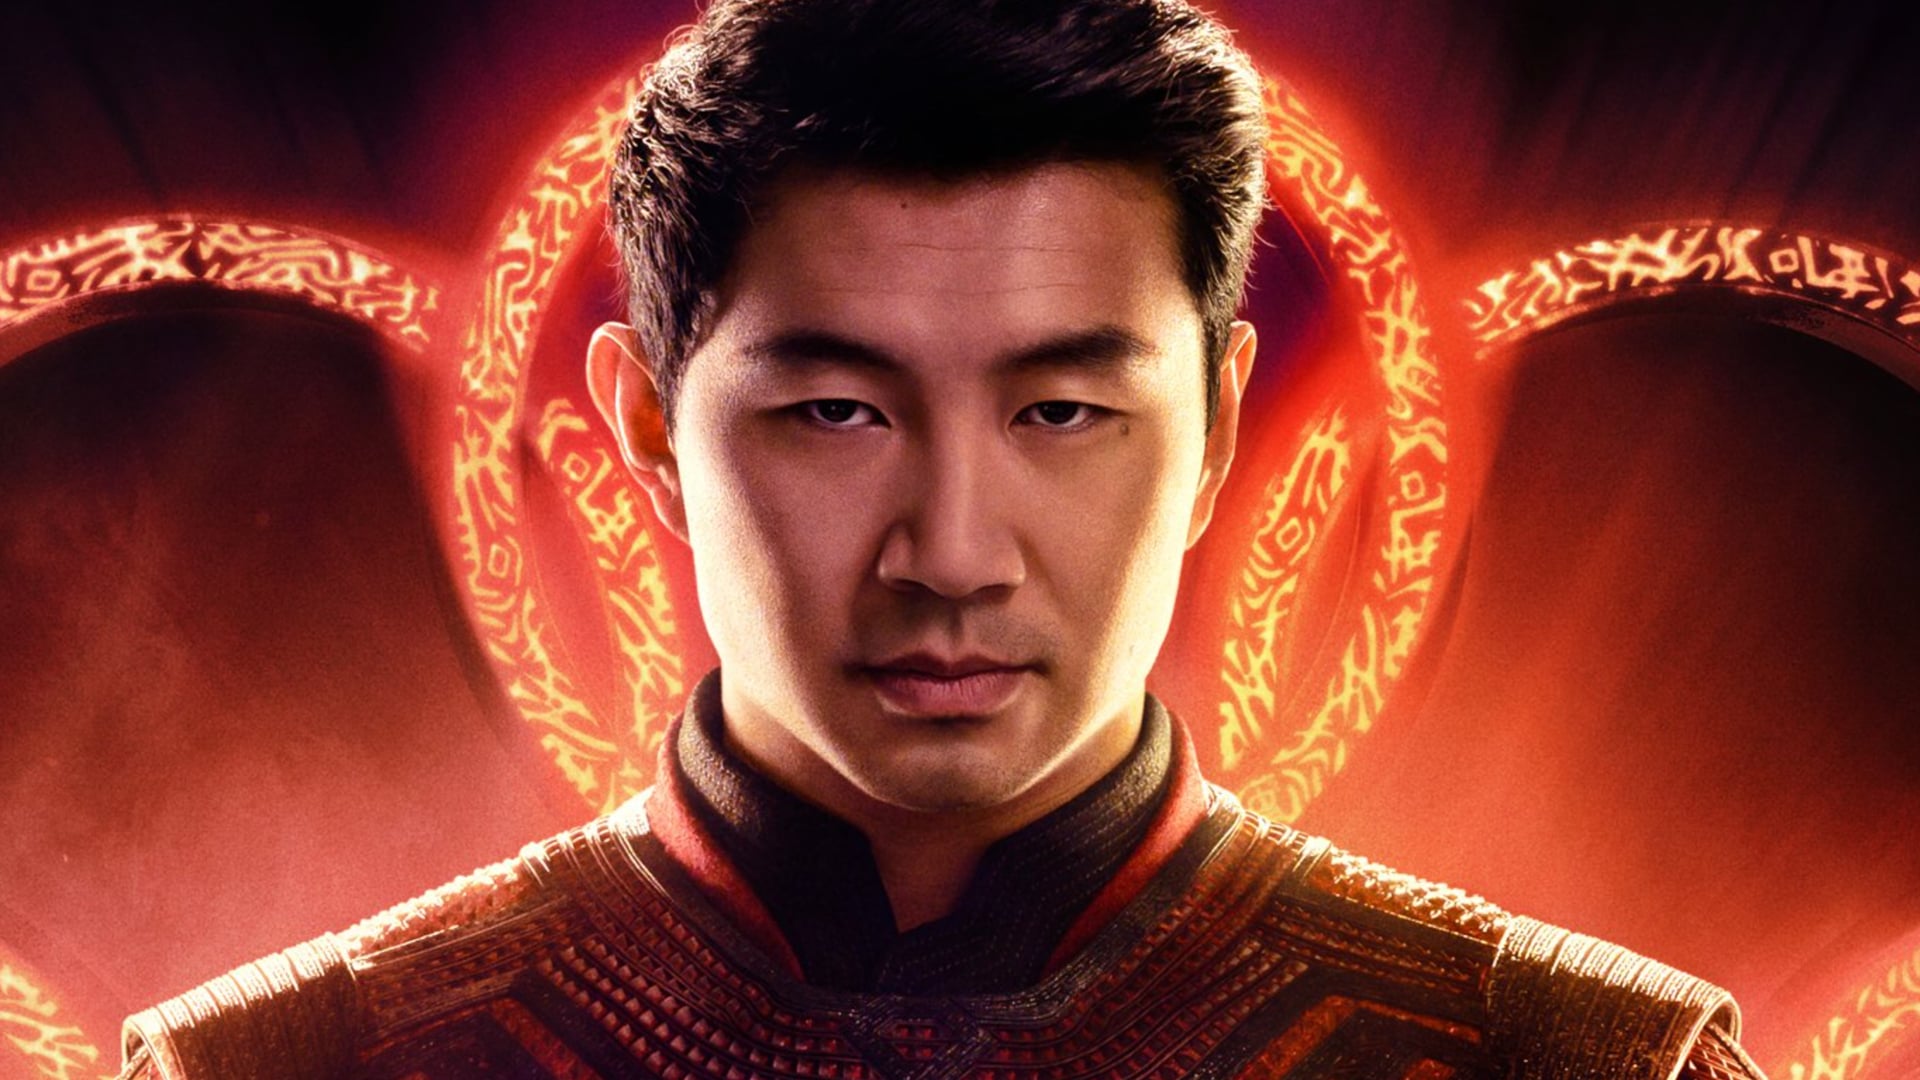 Shang Chi and the Legend of the Ten Rings - Trailer "Rise"